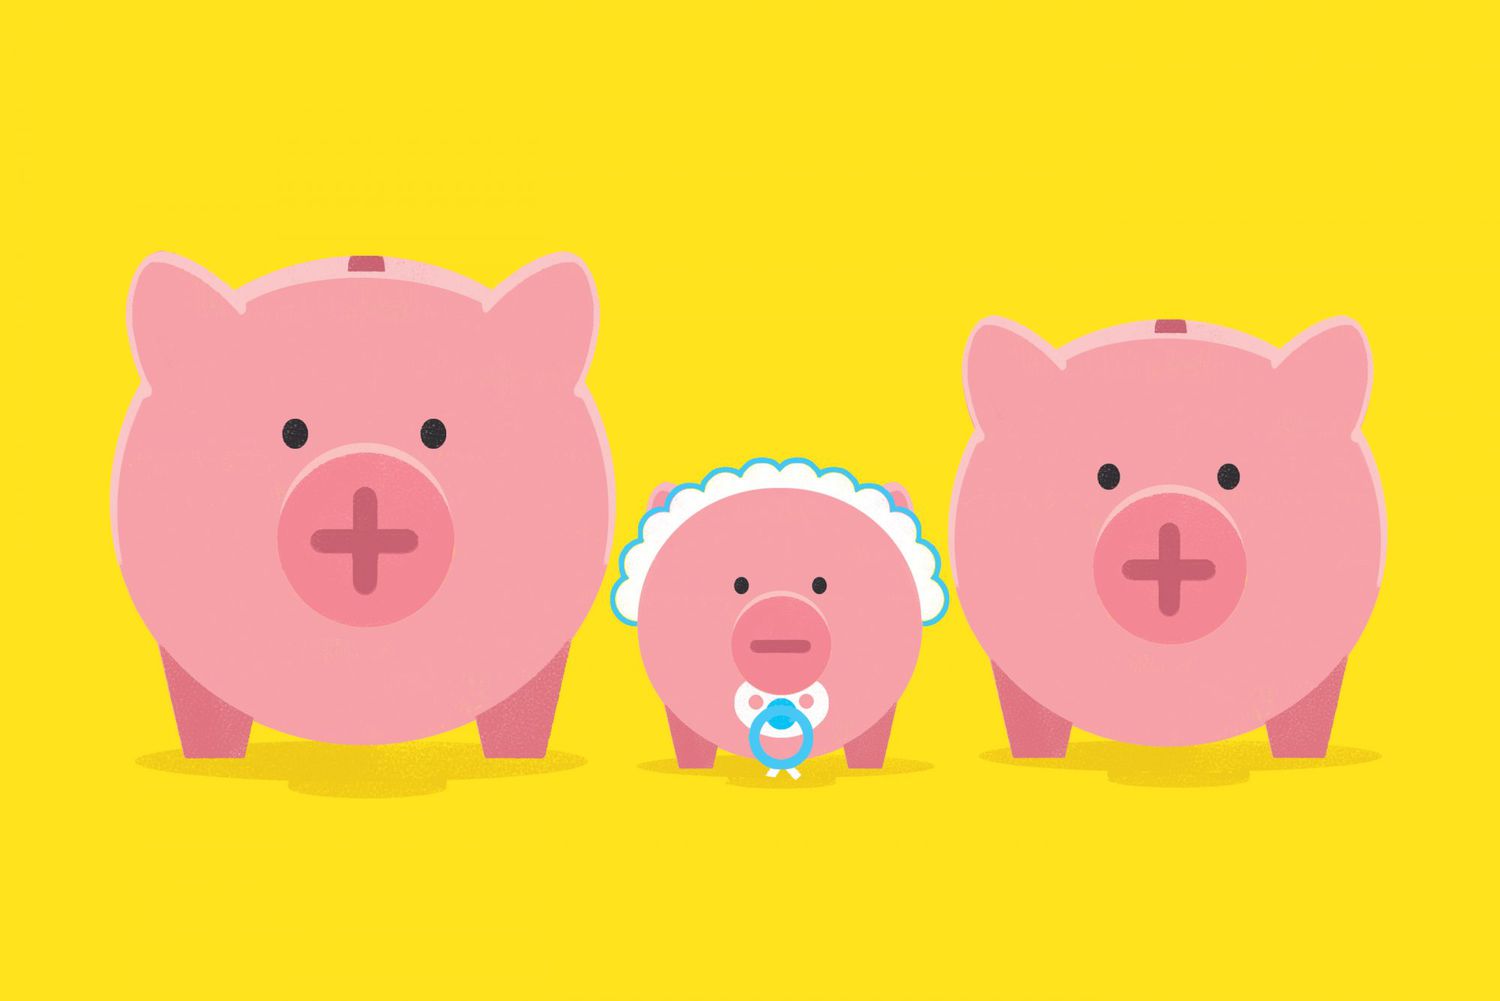 illustration of three piggy banks, one which is dressed up in a bonnet and pacifier to look like a newborn